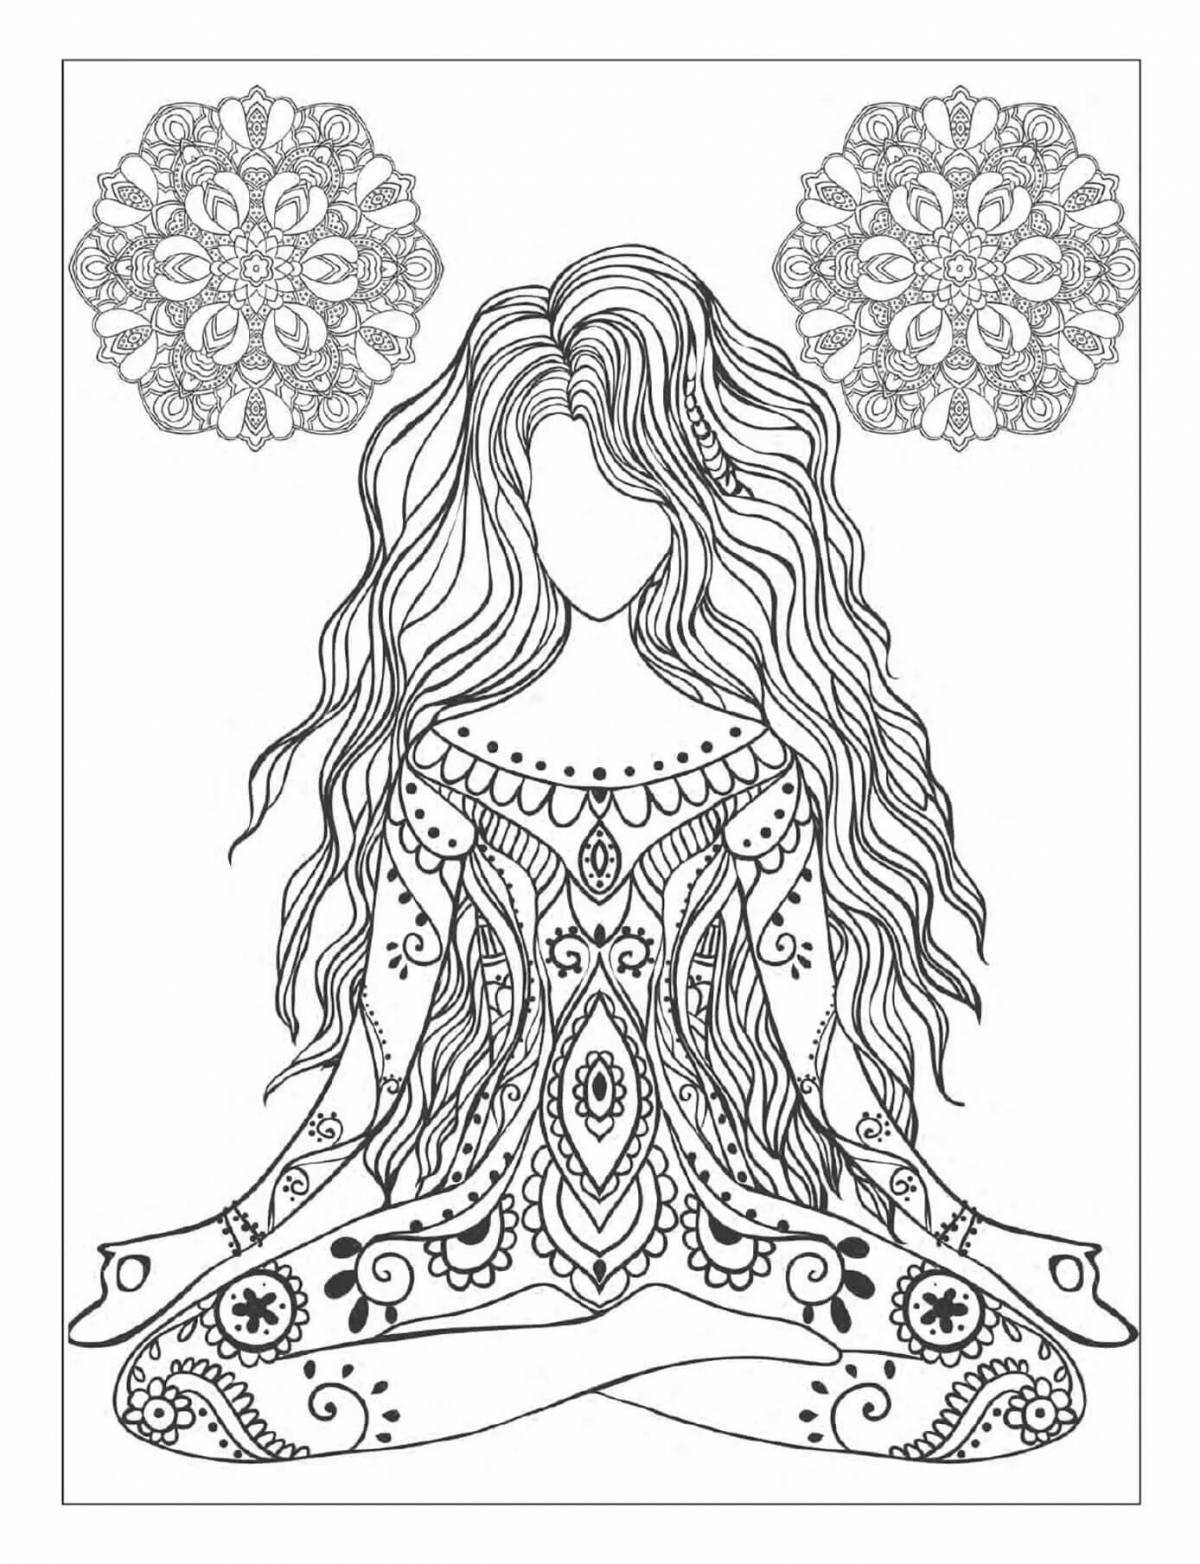 Magic coloring book for meditation and relaxation